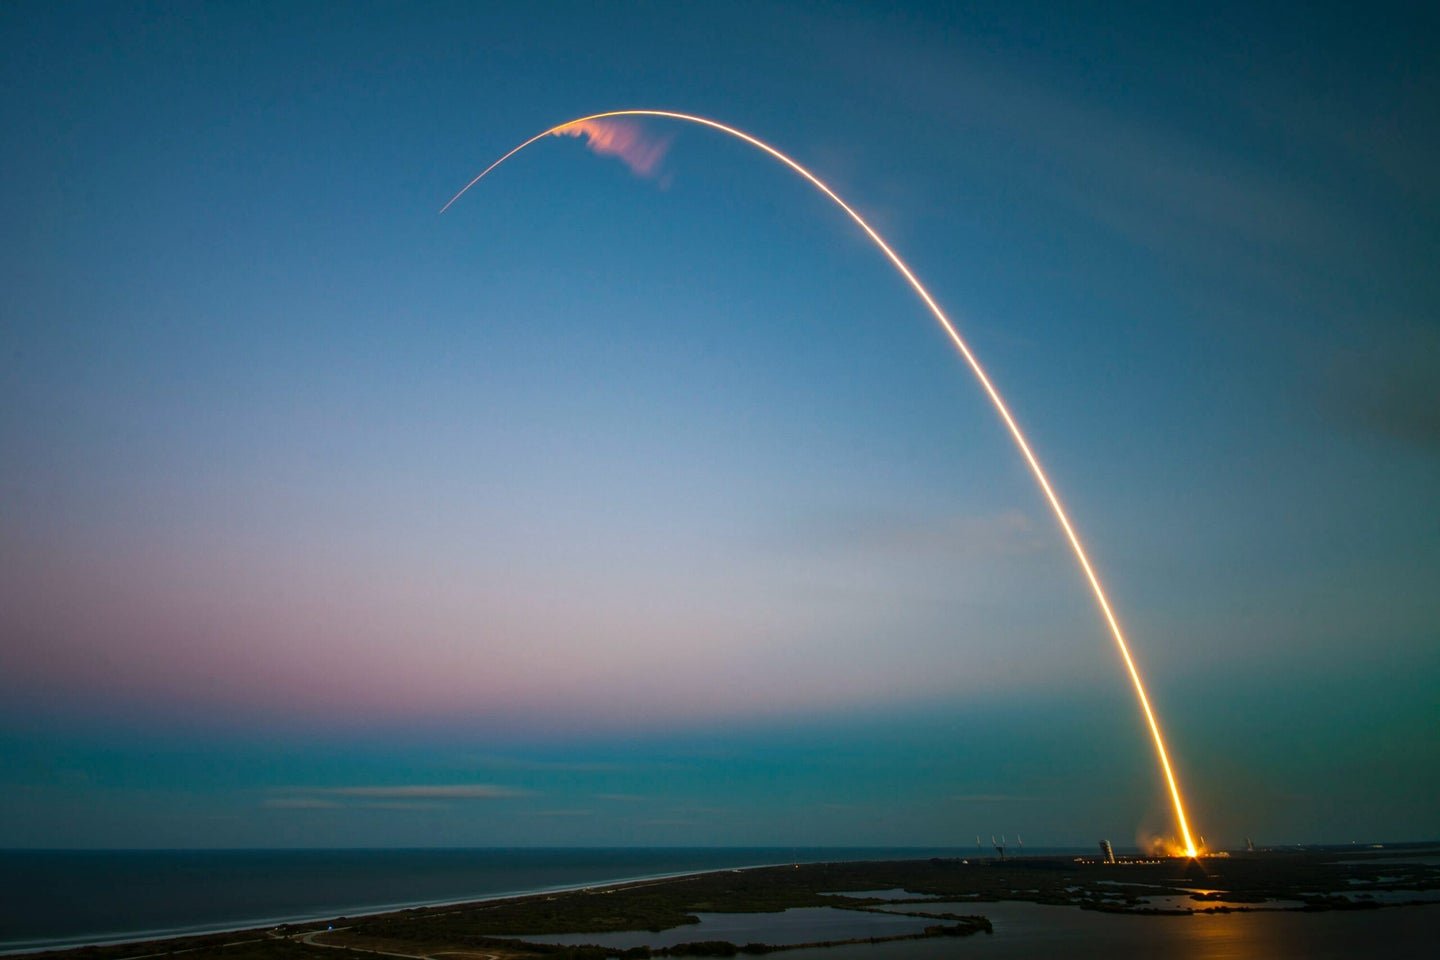 The military wants one-hour global delivery. SpaceX thinks it can pull it off.